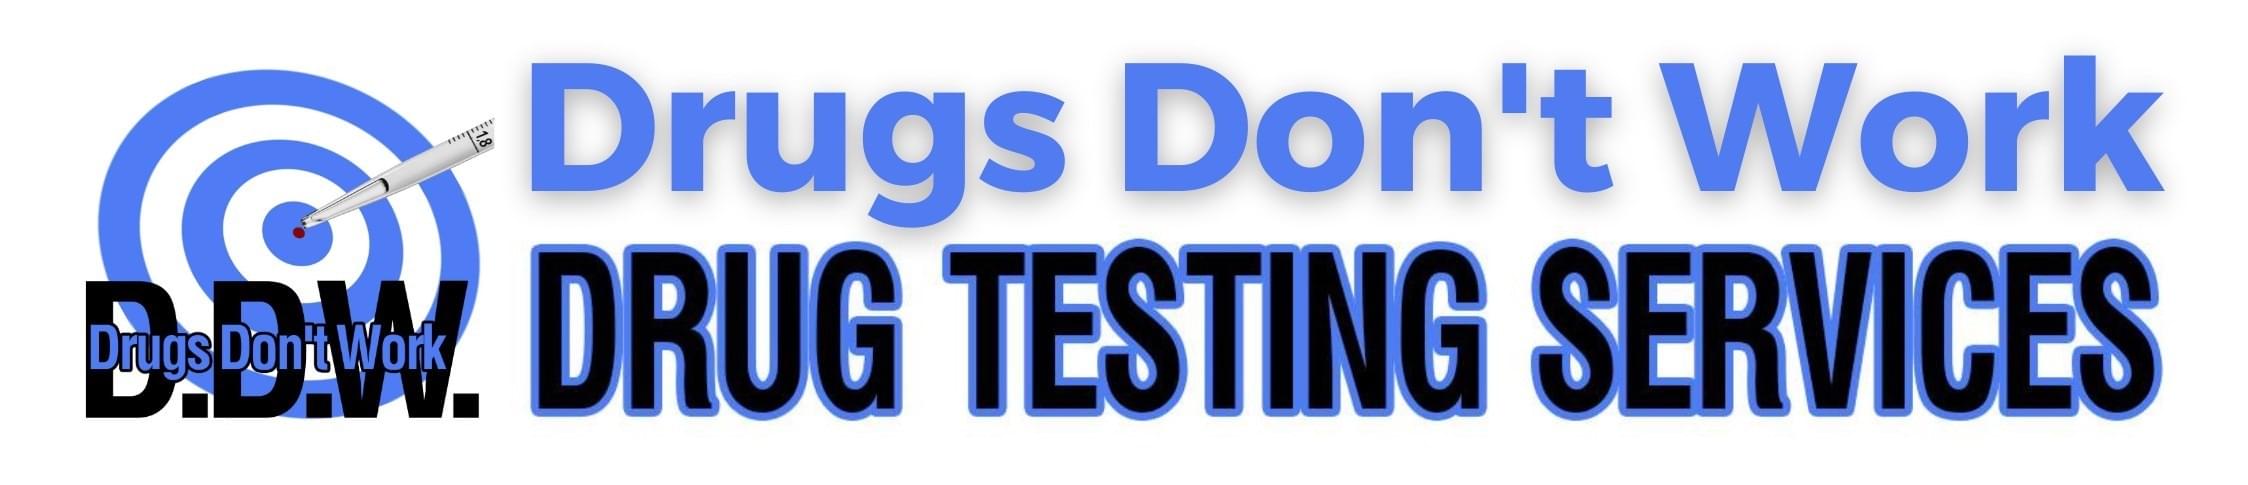 D.D.W (Drugs Don’t Work) Drug Testing Services  provides accredited & certified, safe drug free workplace,  drug testing and DNA services to employers, courts and individuals in  New York, New Jersey, Connecticut, Pennsylvania, Maryland, Louisville Kentucky and Ohio.  Proudly Serving Customers Since 2011